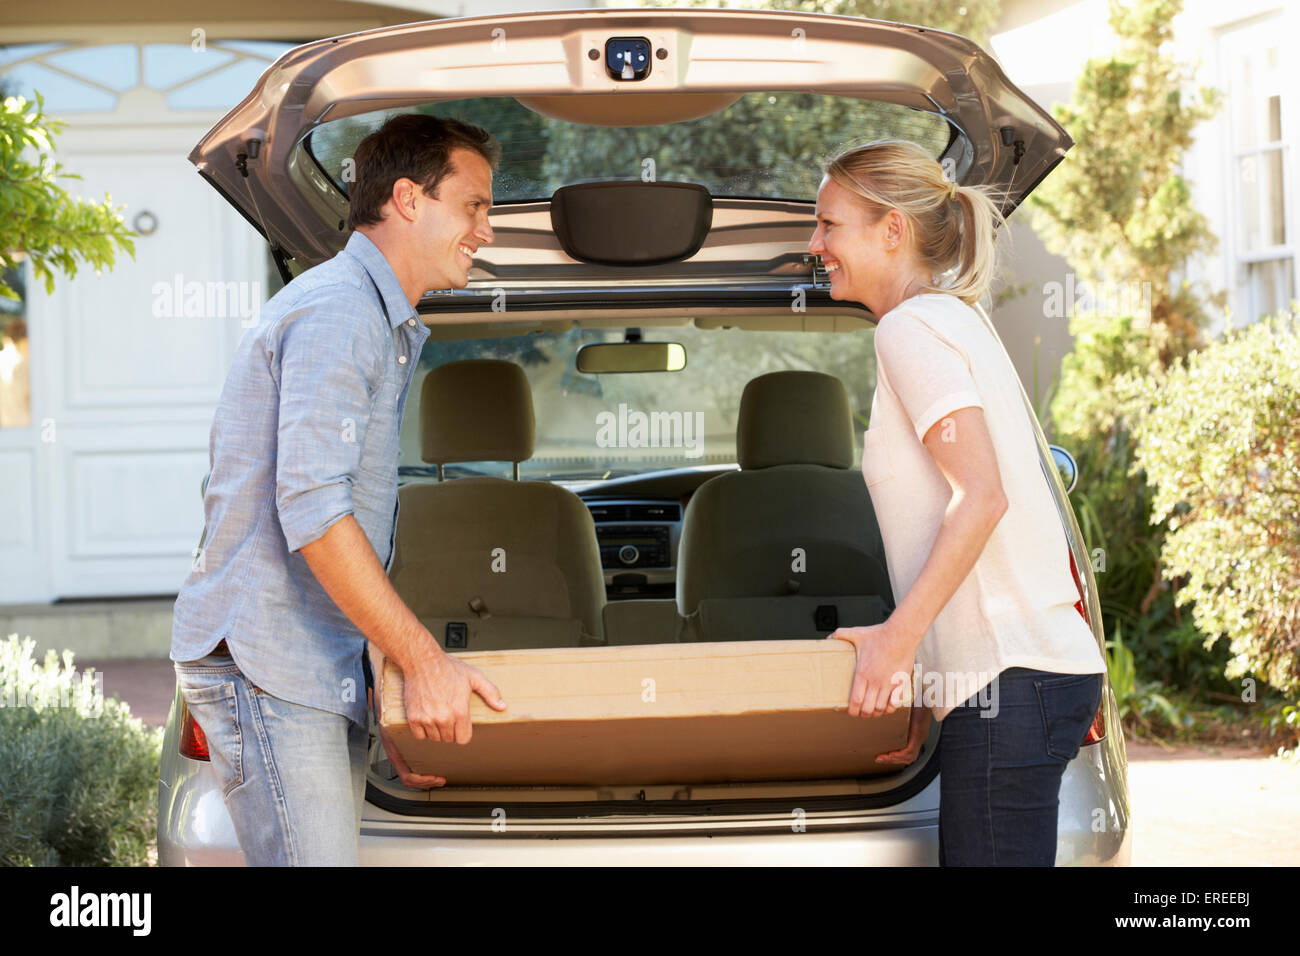 Couple Loading Large Package Into Back Of Car Stock Photo